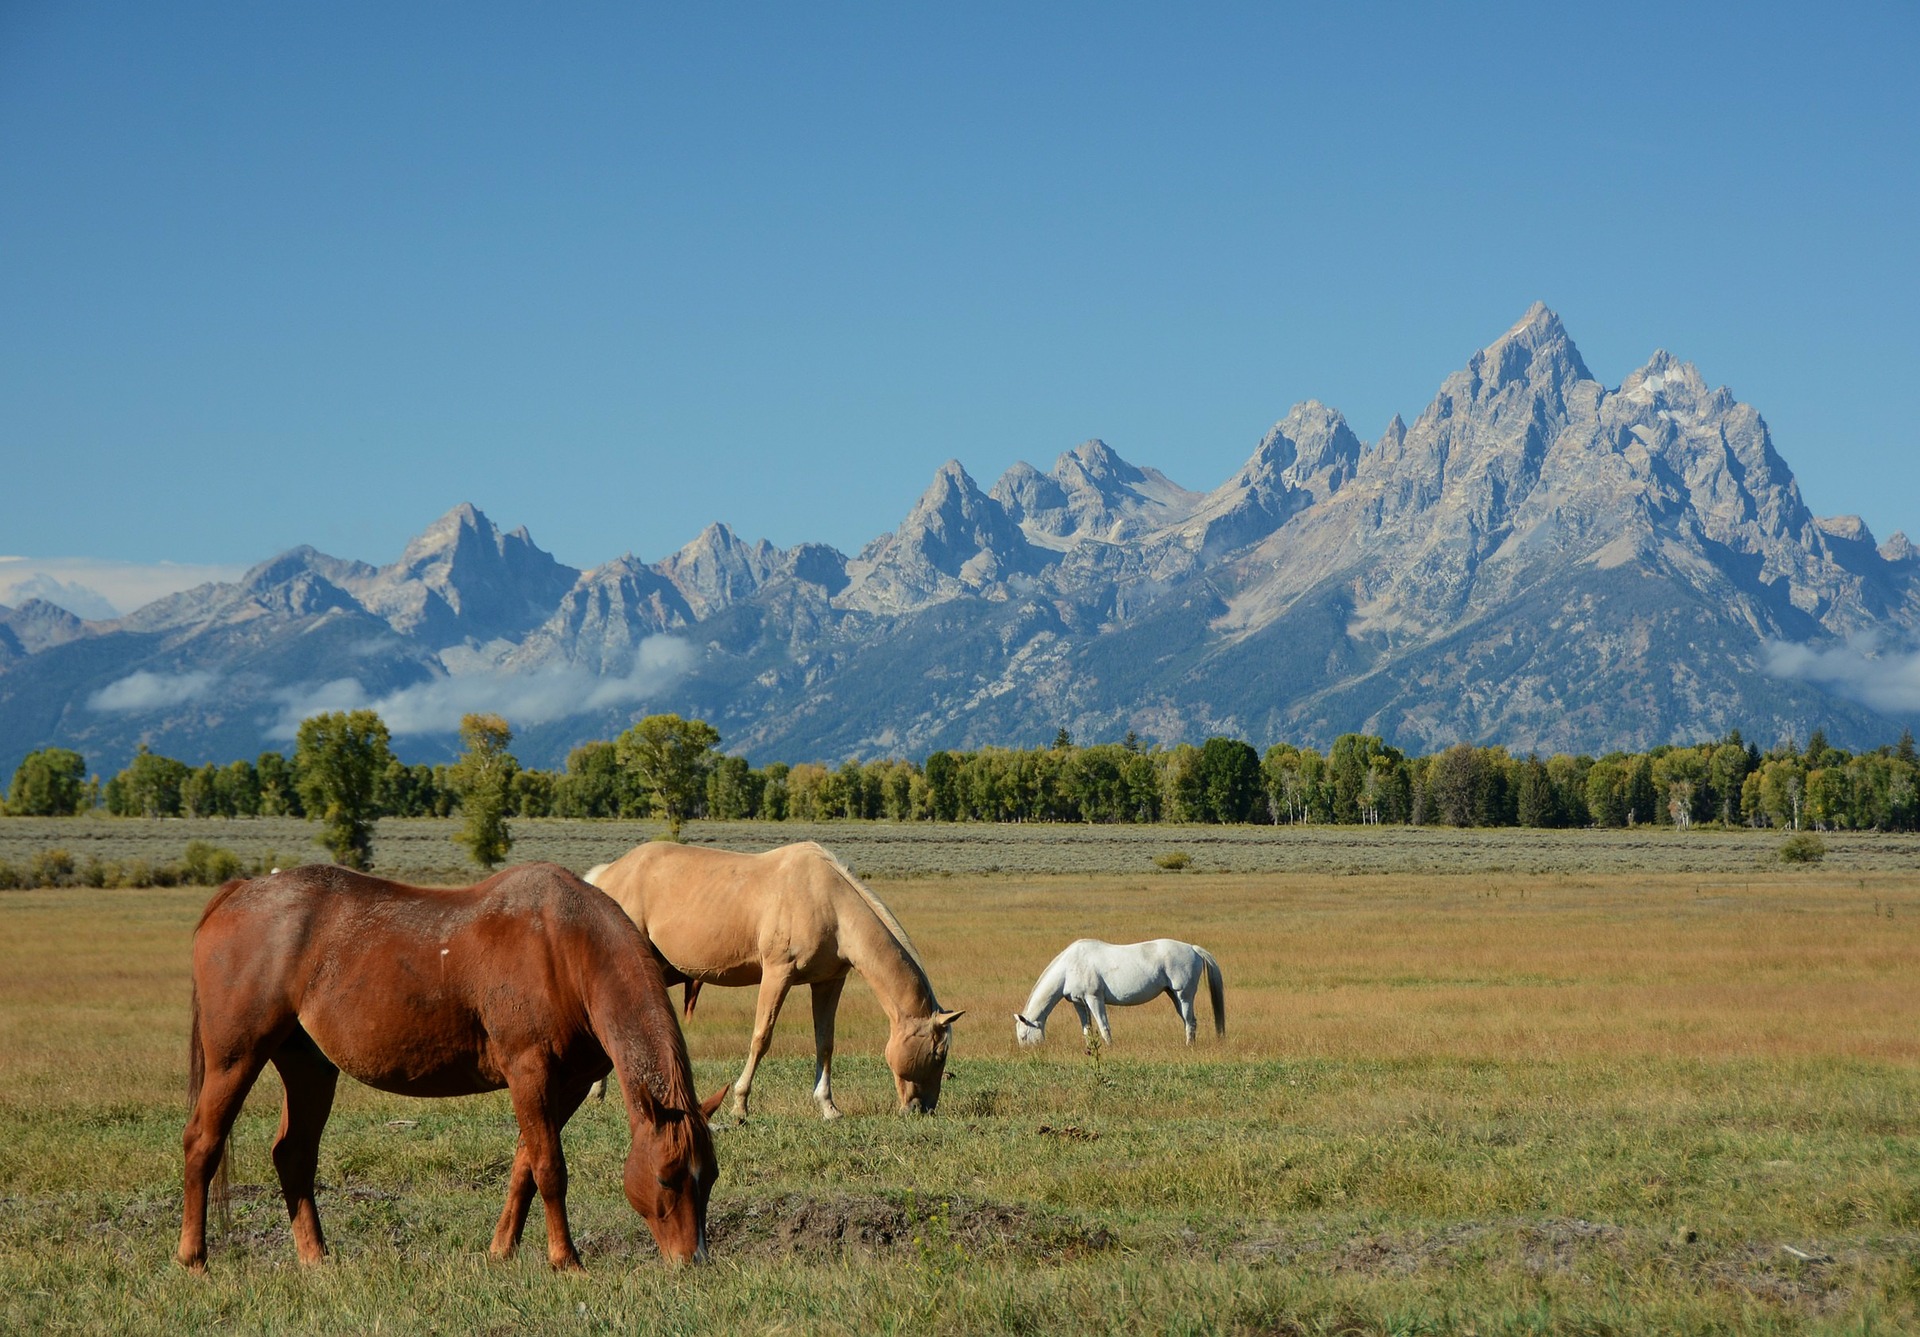 Traveling to Wyoming? Liberty Medical has made it easier than ever before for clients to travel with a trusted portable oxygen concentrator.